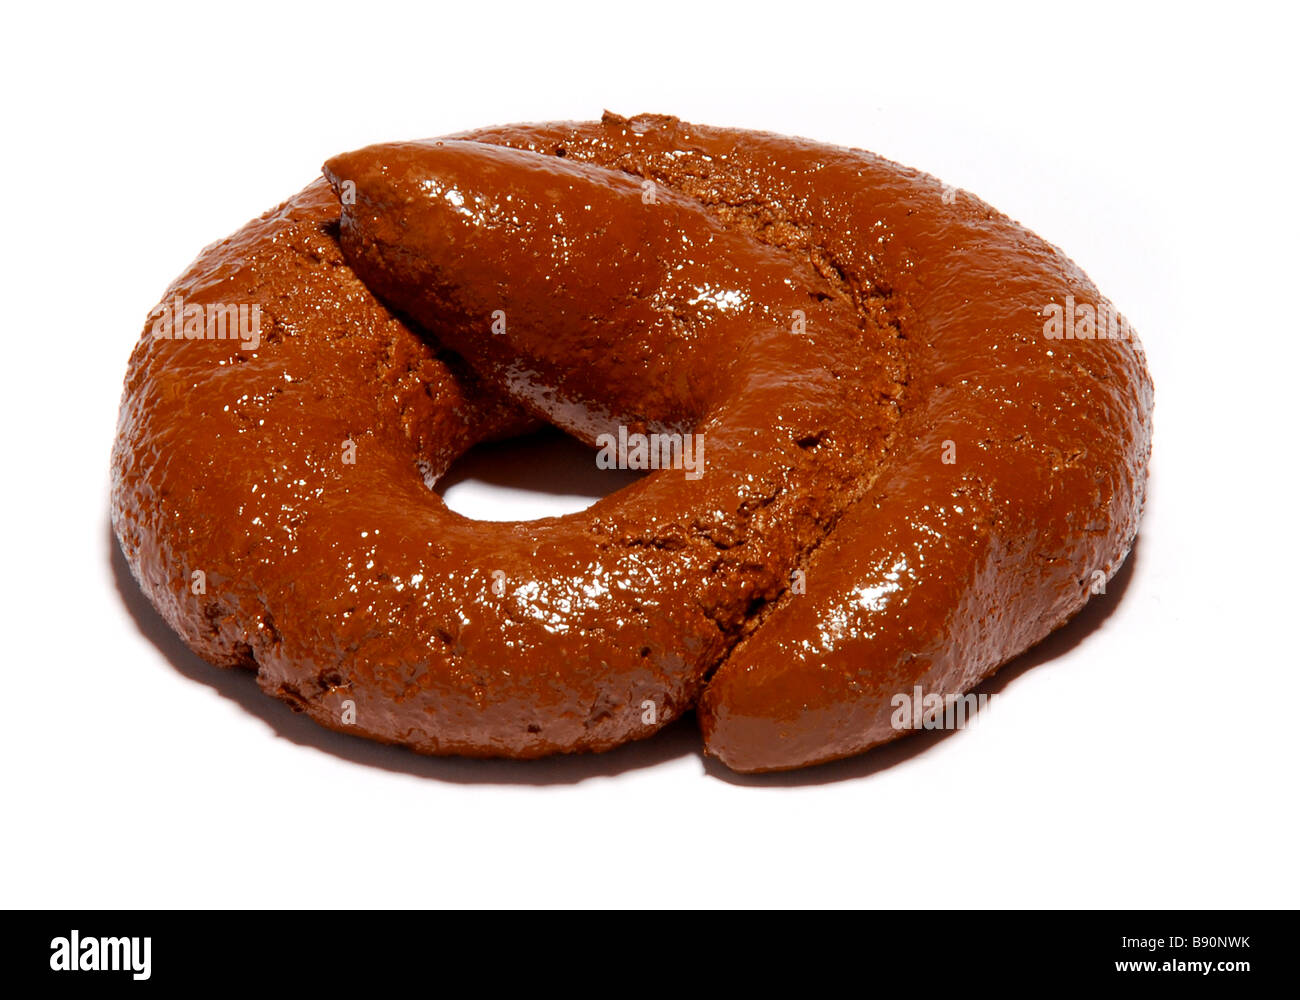 A fake or joke turd or poo. Picture by Paddy McGuinness paddymcguinness Stock Photo